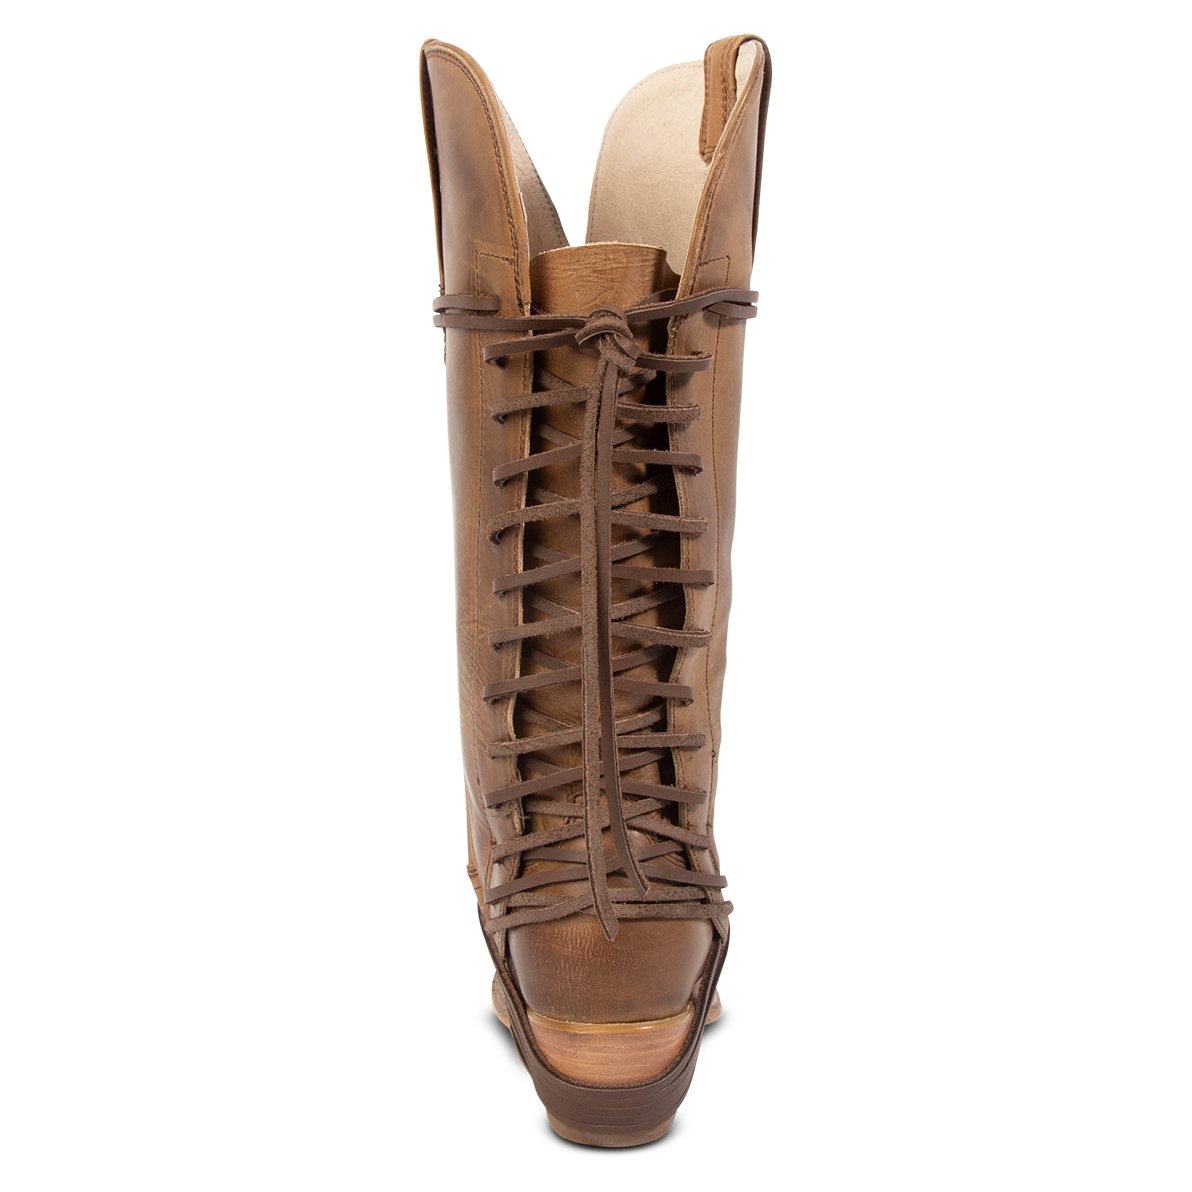 Back view showing back lace panel and low heel on FREEBIRD women's Woodland tan leather cowboy boot